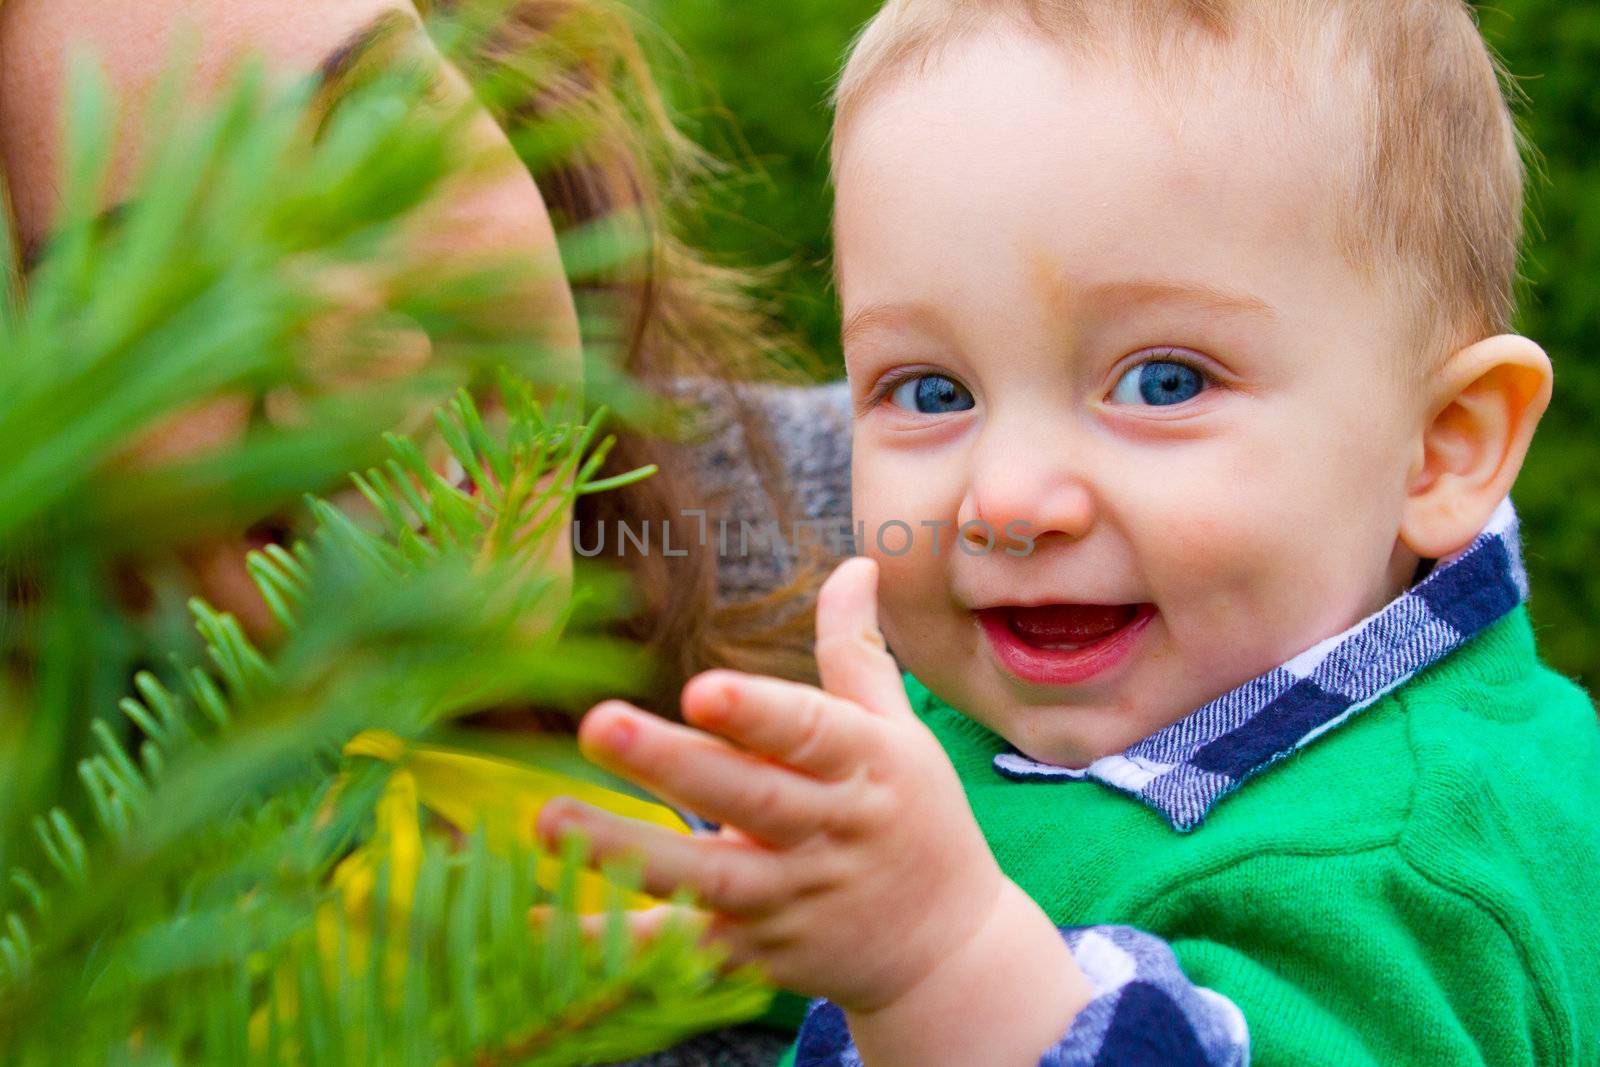 A cute young boy in a green shirt is having fun at a Christmas tree farm in Oregon.